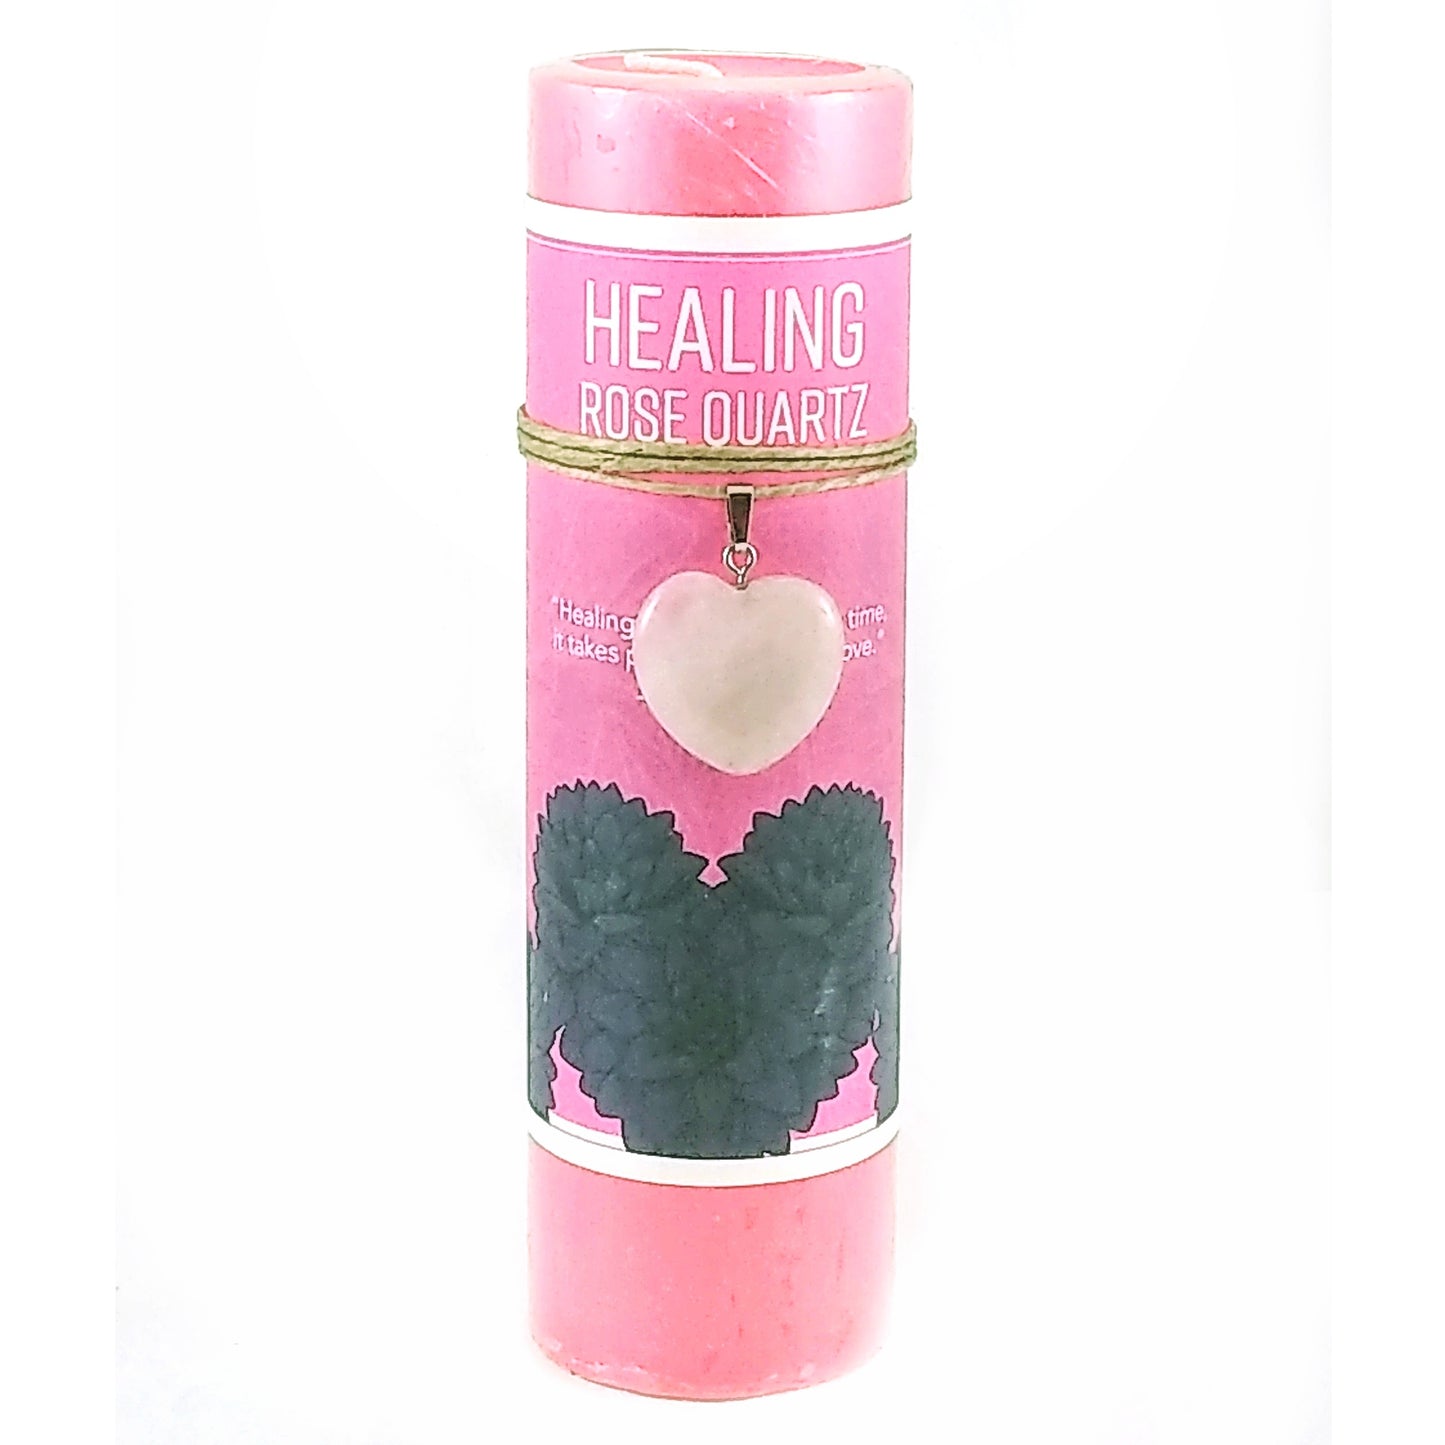 Crystal Heart Candle - Healing with Rose Quartz Pendant